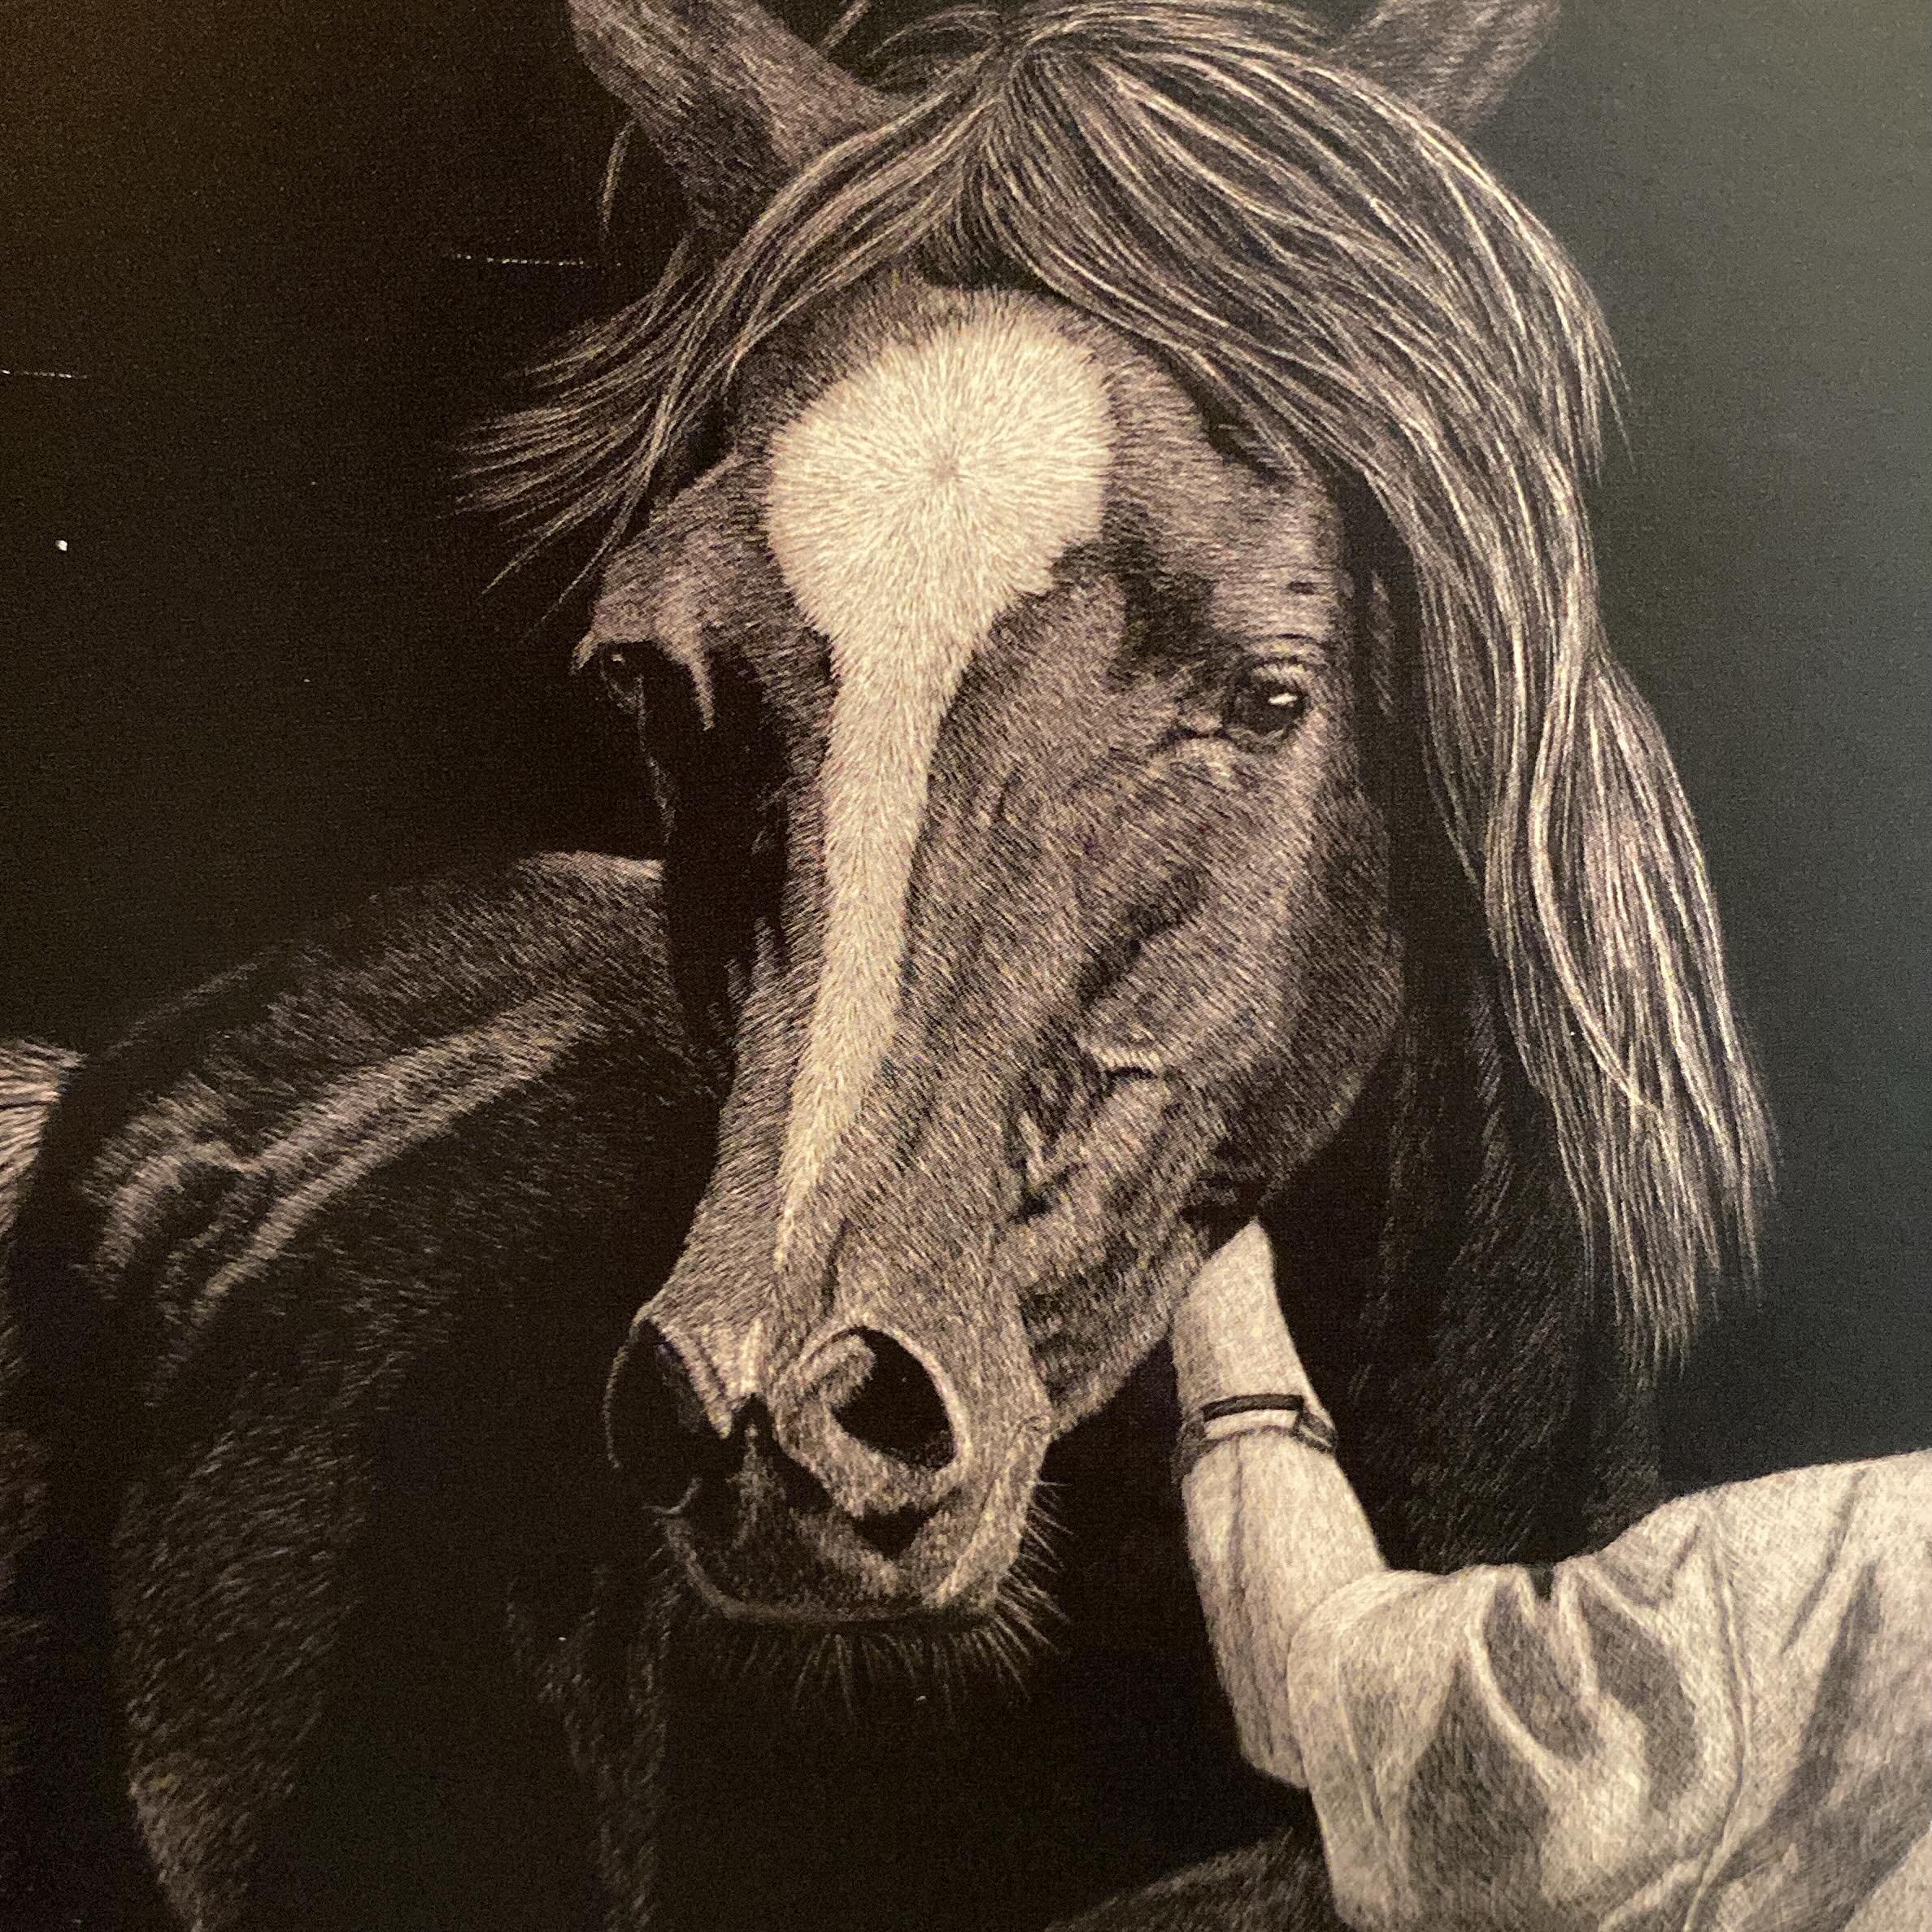 It&rsquo;s a new month which means a new calendar photo to enjoy from @lynnkibbefineart! 🐴

#scratchboard #fineart #horse #blackandwhite #may